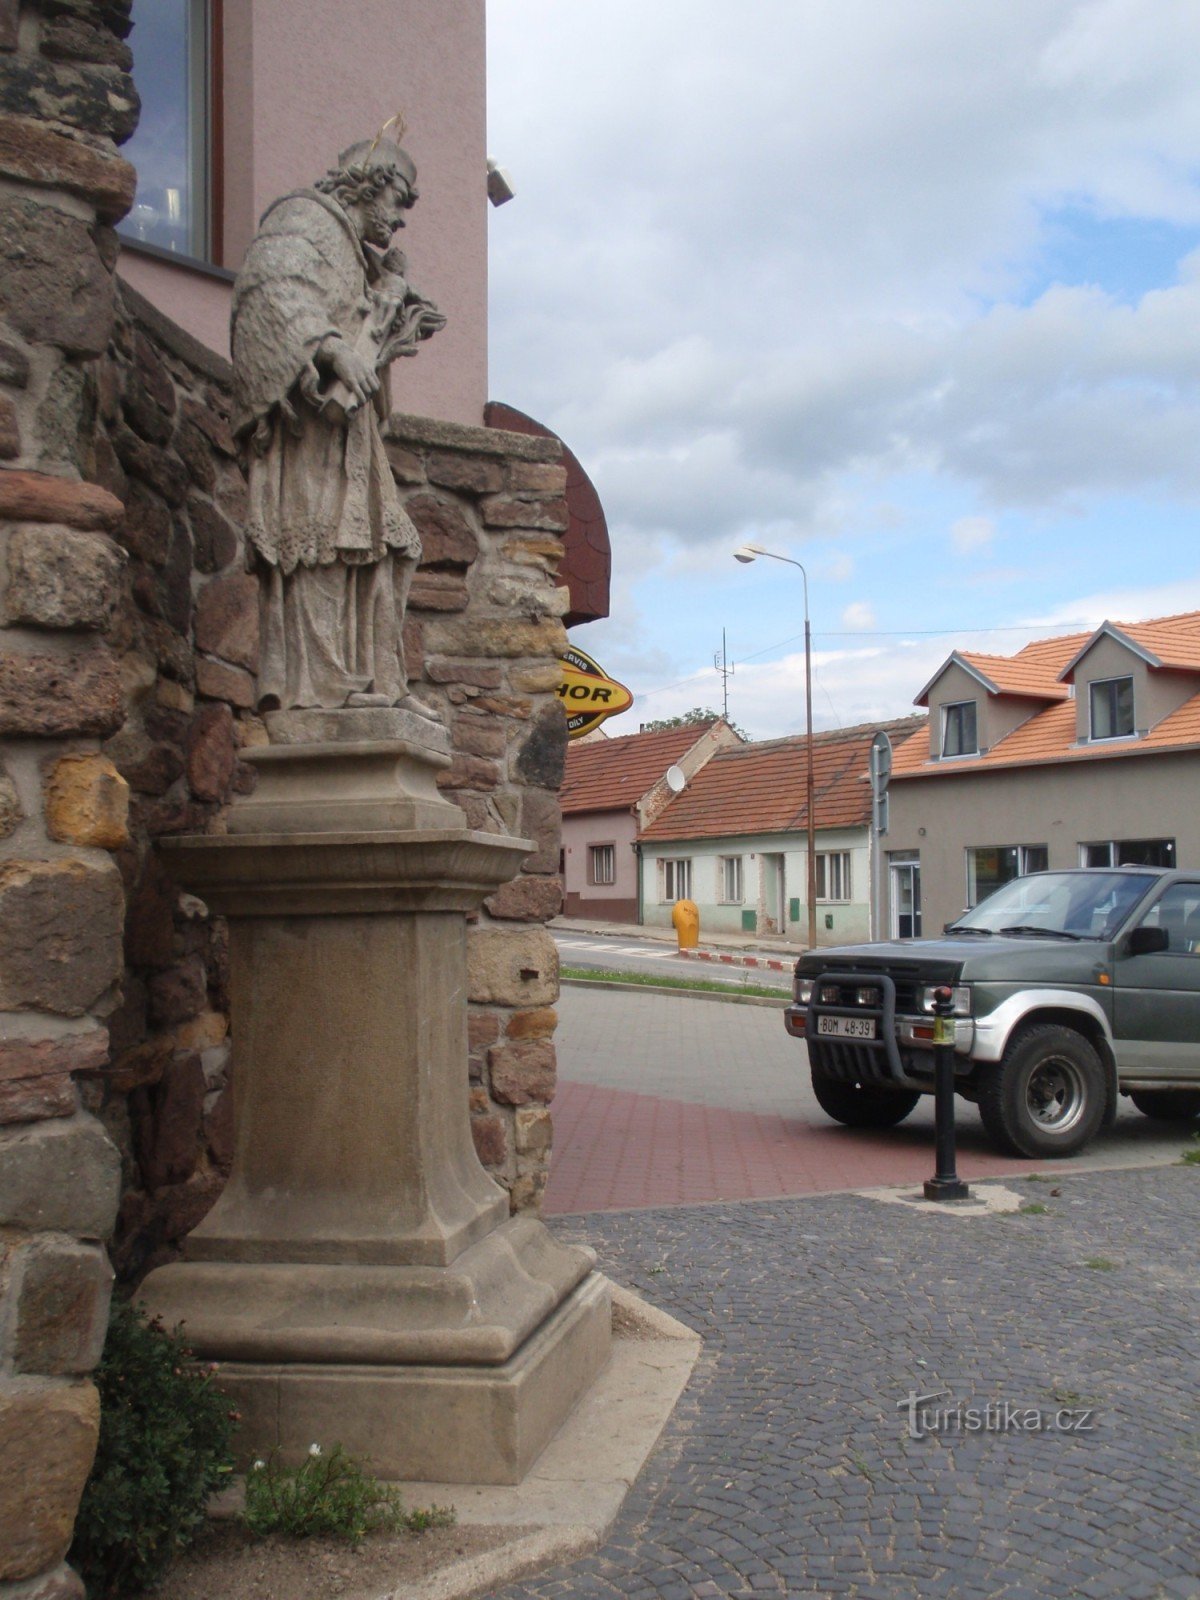 Small monuments of Ivančice